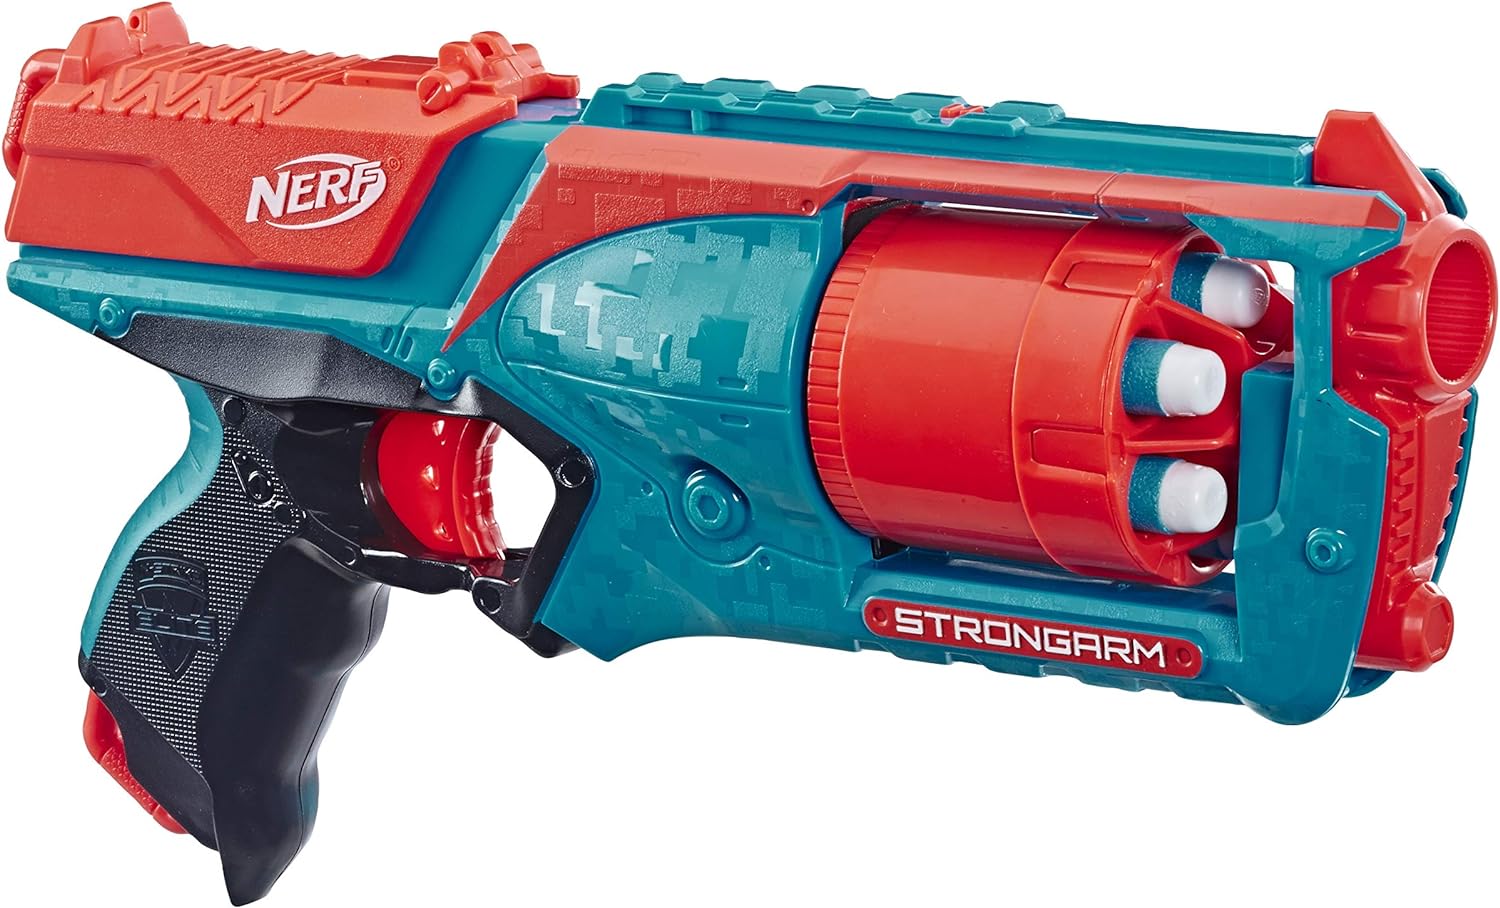 These Elite Strongarms are great beginner Nerf guns. They don't require batteries, they aren't too hard to load and cock, they are relatively inexpensive, and they have been reliable. I have also purchased the Nerf Triad Ex-3 (similar to the Nerf Jolt), and the Nerf Modulus (a battery powered magazine loading gun).Pros:They are inexpensive compared to the battery guns. The Triads were cheaper, but only held 3 shots, and 2 of 3 stopped working after half a year.They have been reliable. I initiall